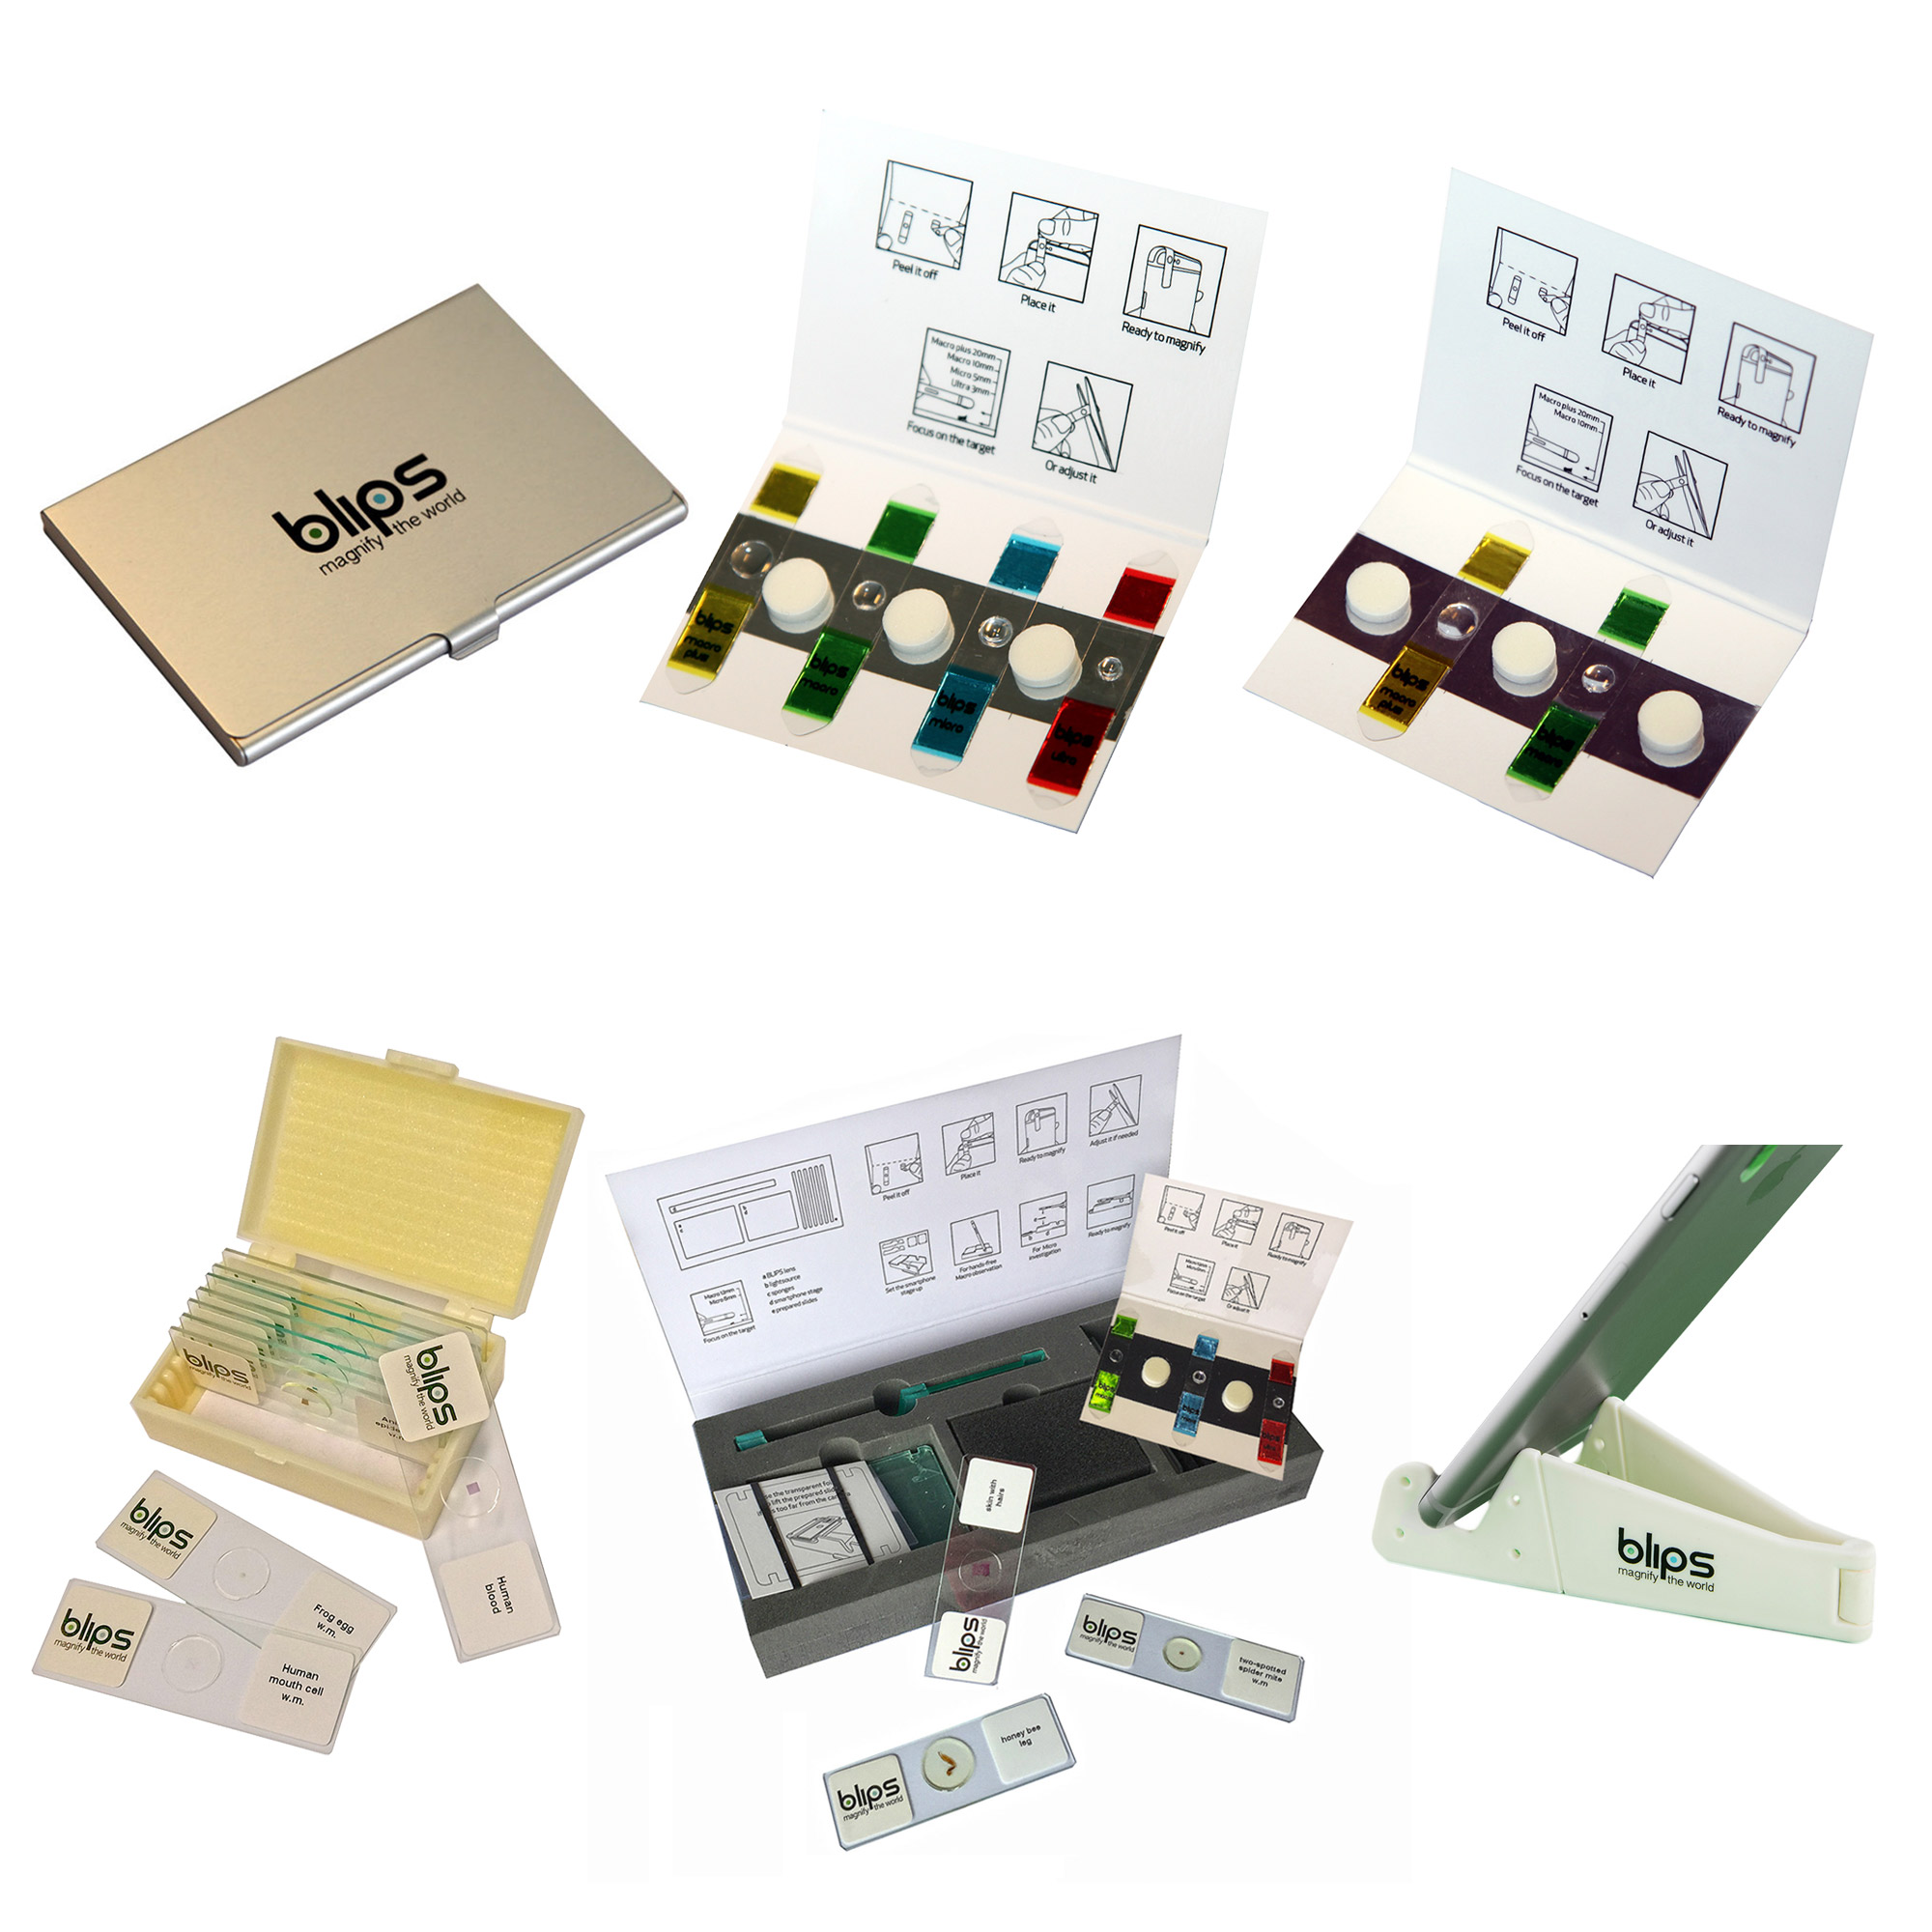 Blips Gift Pack XL - a portable microscopy gift idea for Science lovers